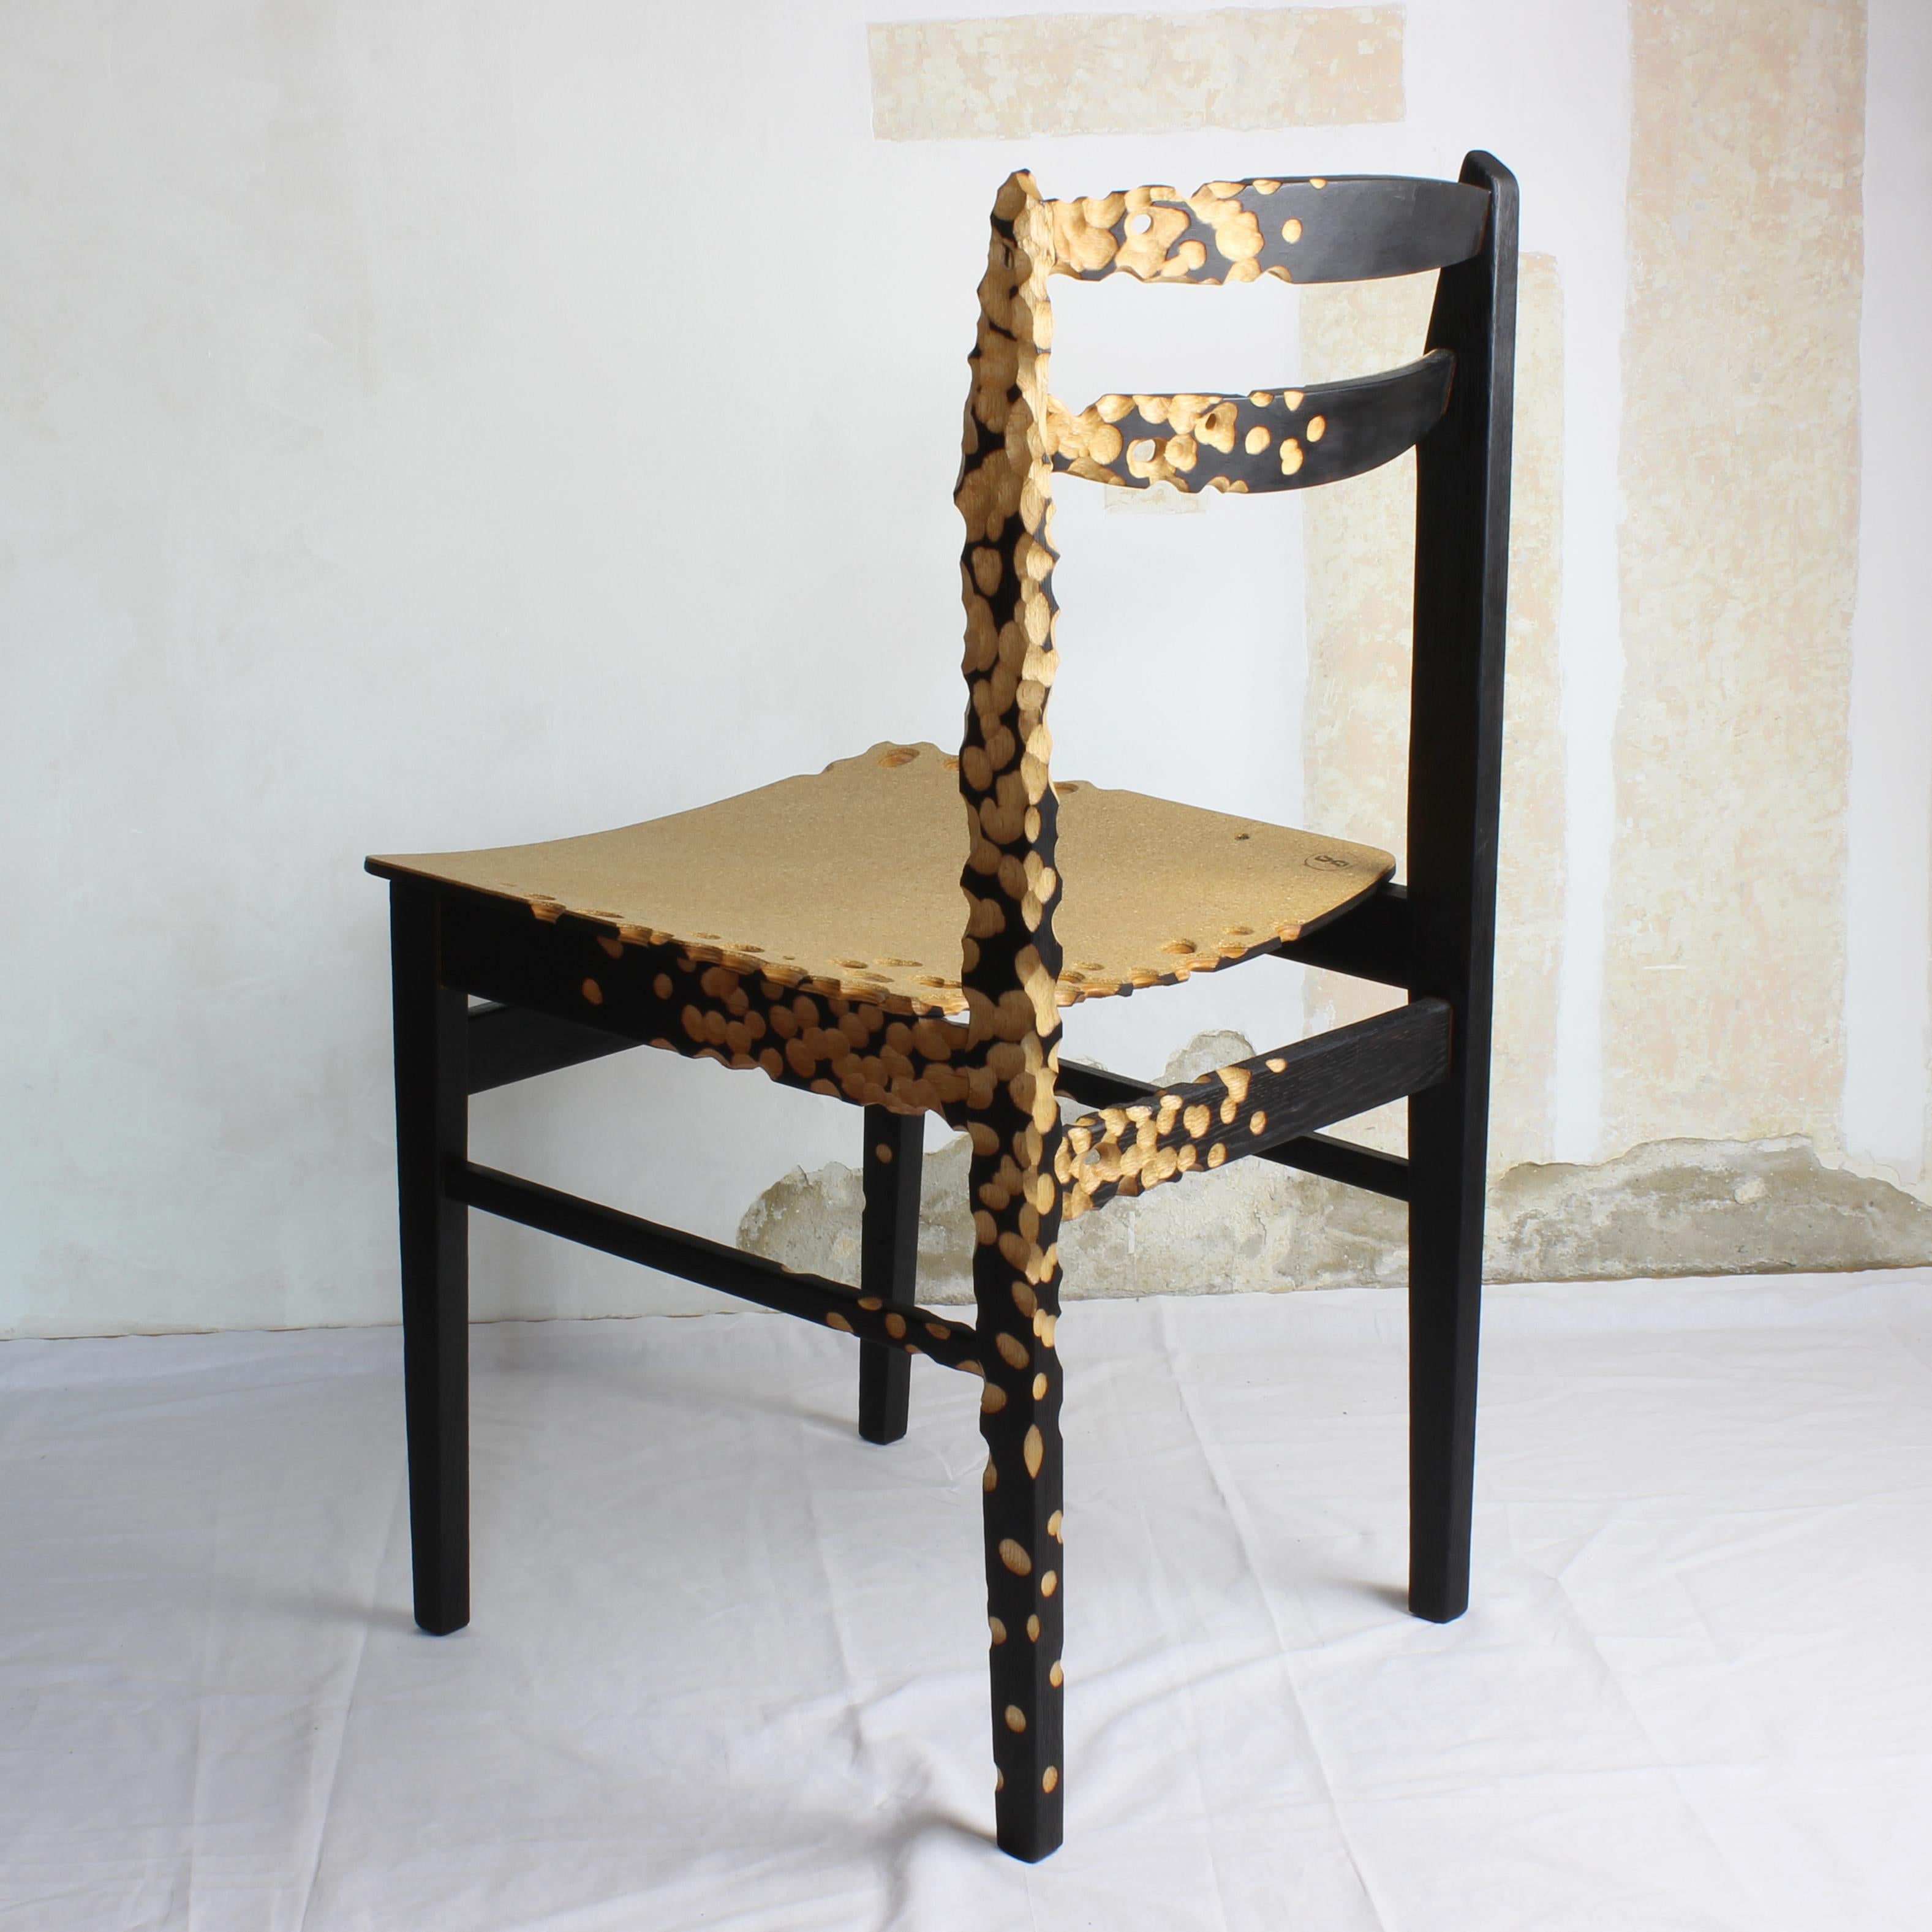 Collectible art sculpture dining chair, one of a kind chair, is made from repurposed wood furniture (mid-century style dining chair) and cork. Creating new objects from reclaimed materials are the real challenge and joy. This sculptural stool is